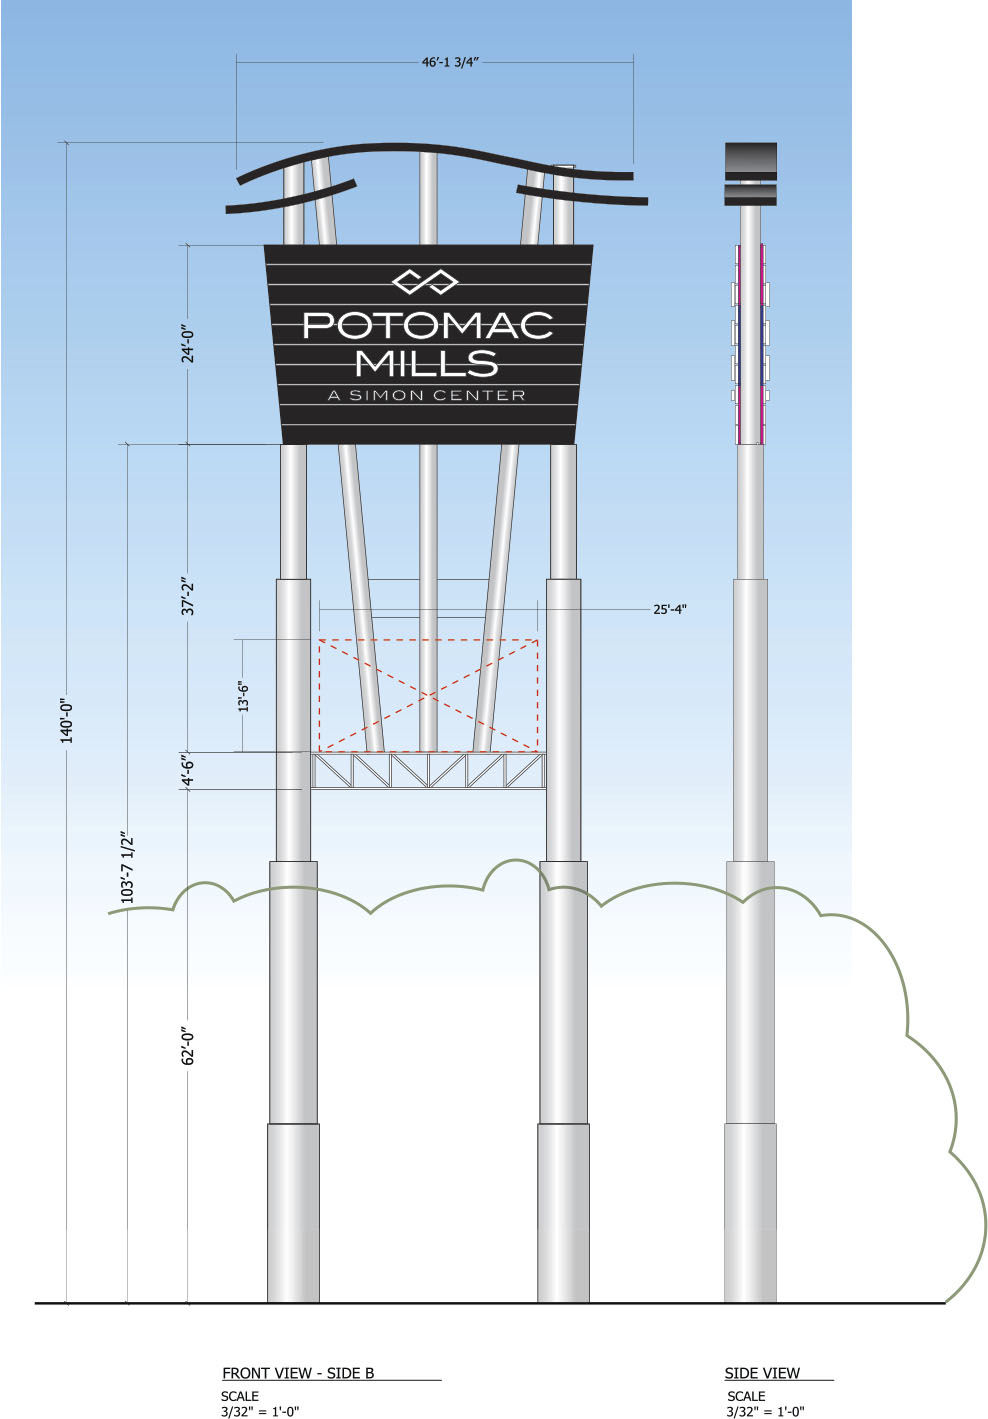 State officials hoped Potomac Mills sign would fall on its own